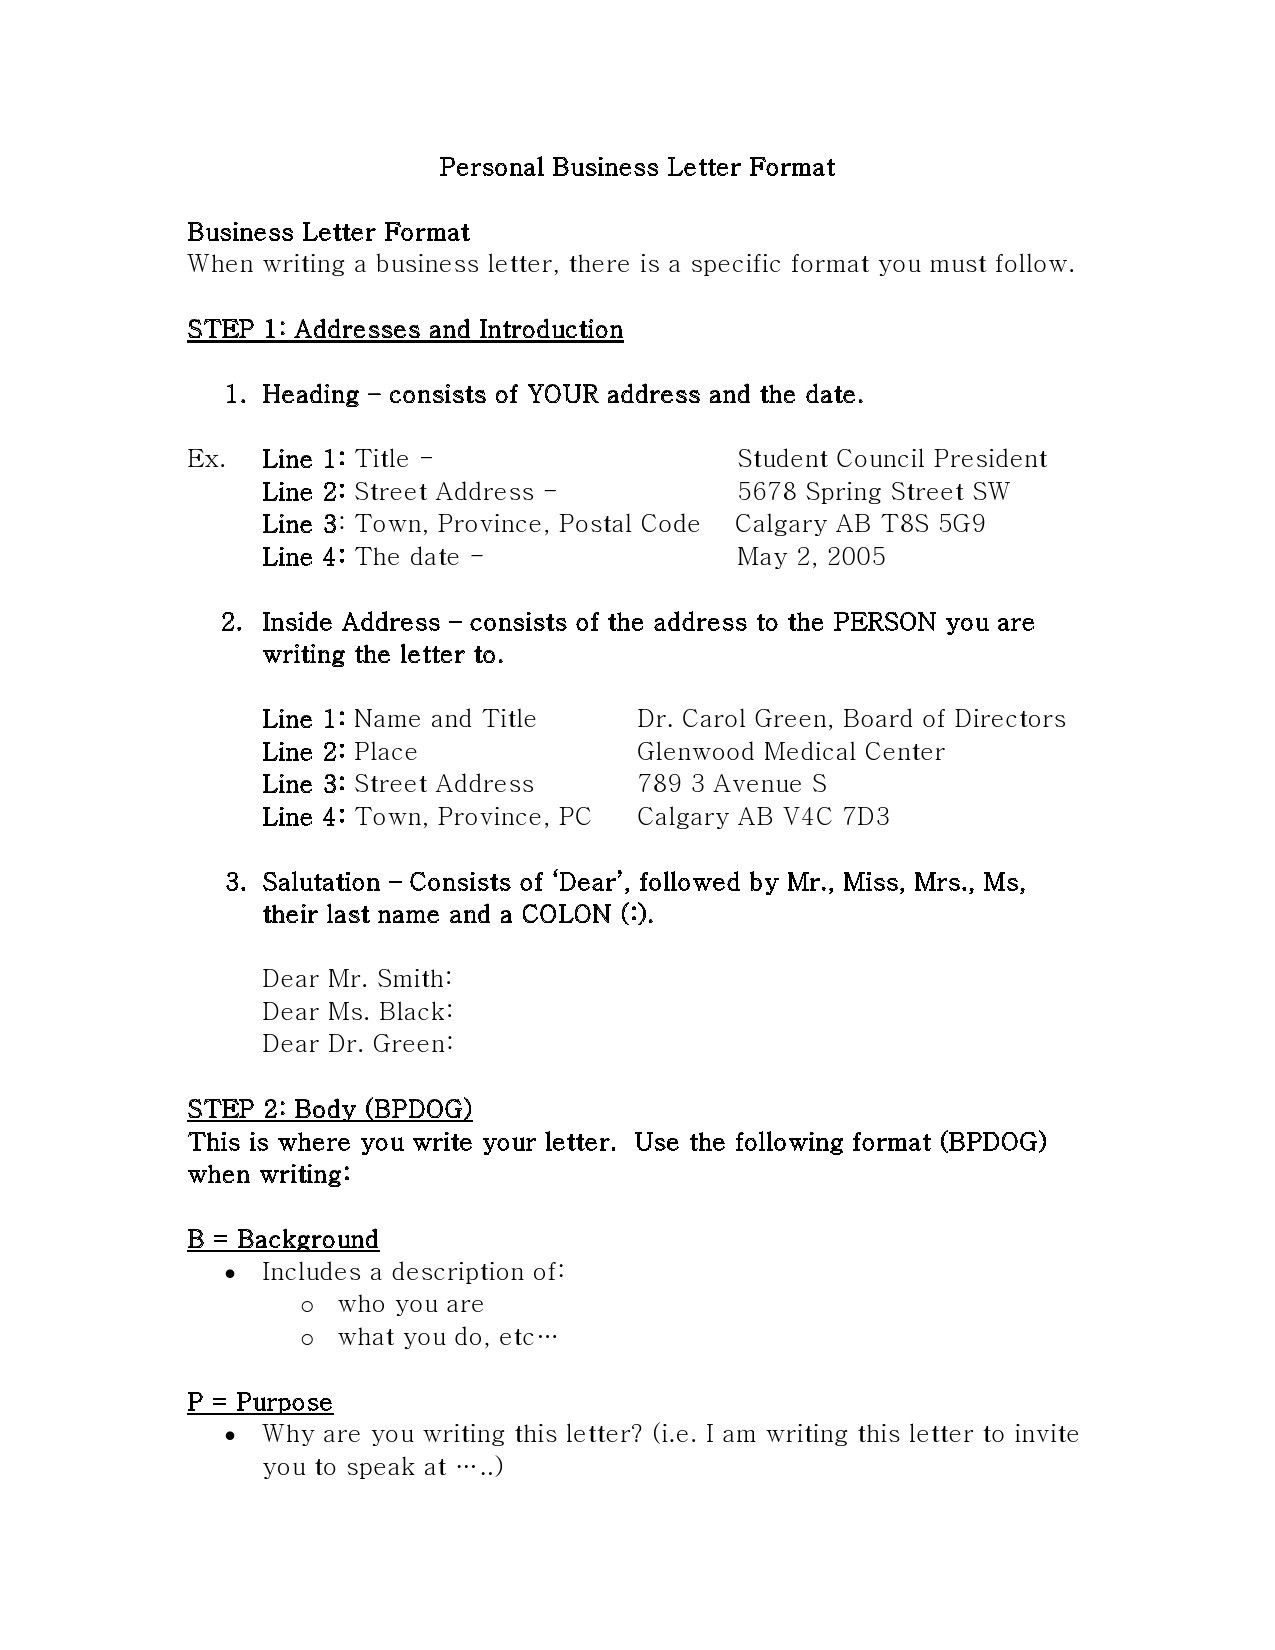 Free personal letter format 11